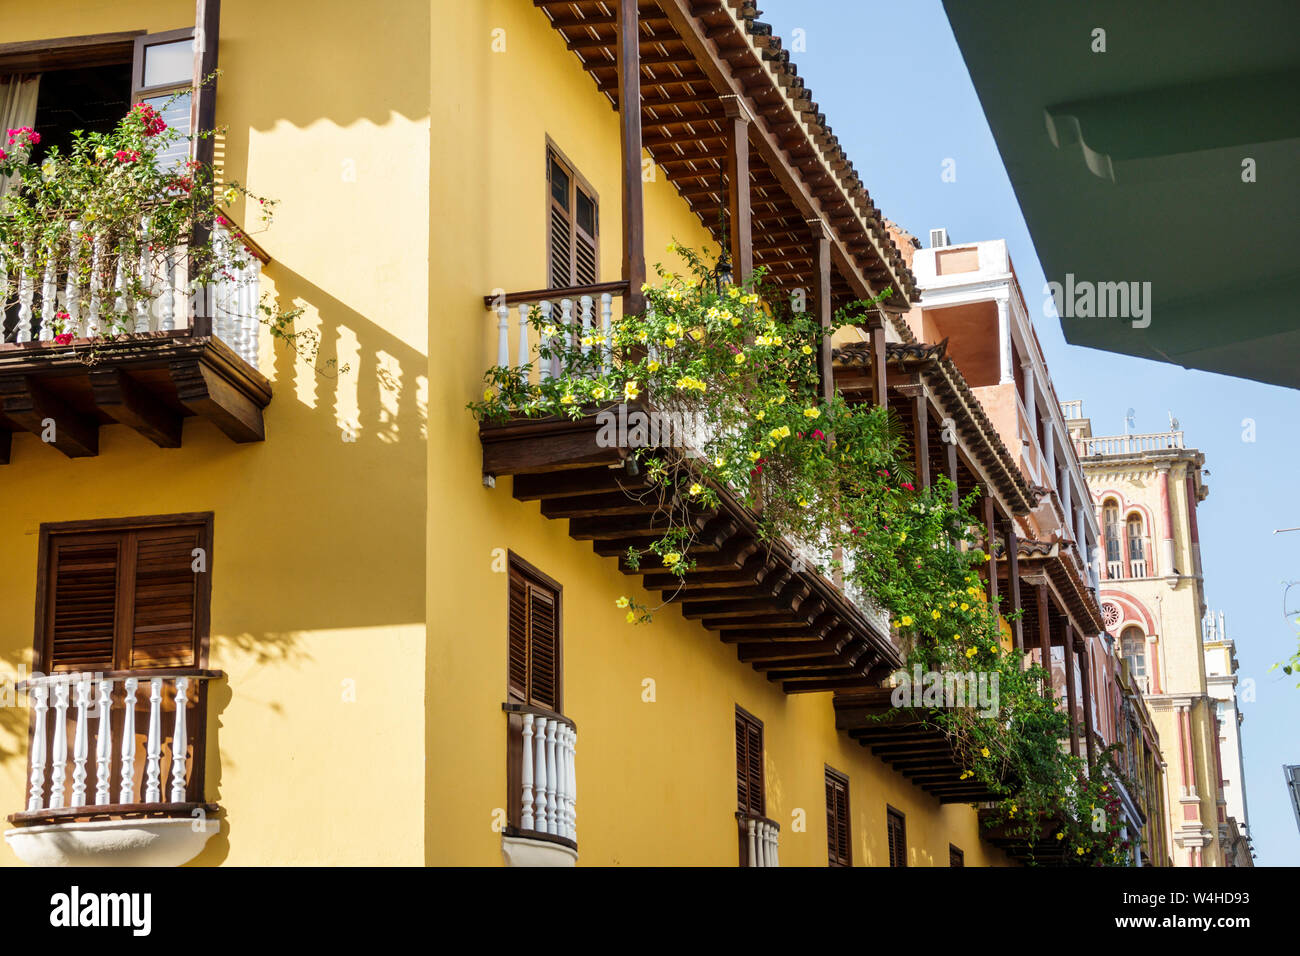 Colombia Cartagena Old Walled City Center centre historic colonial architecture houses exterior balcony wood spindle railing restored resident Stock Photo